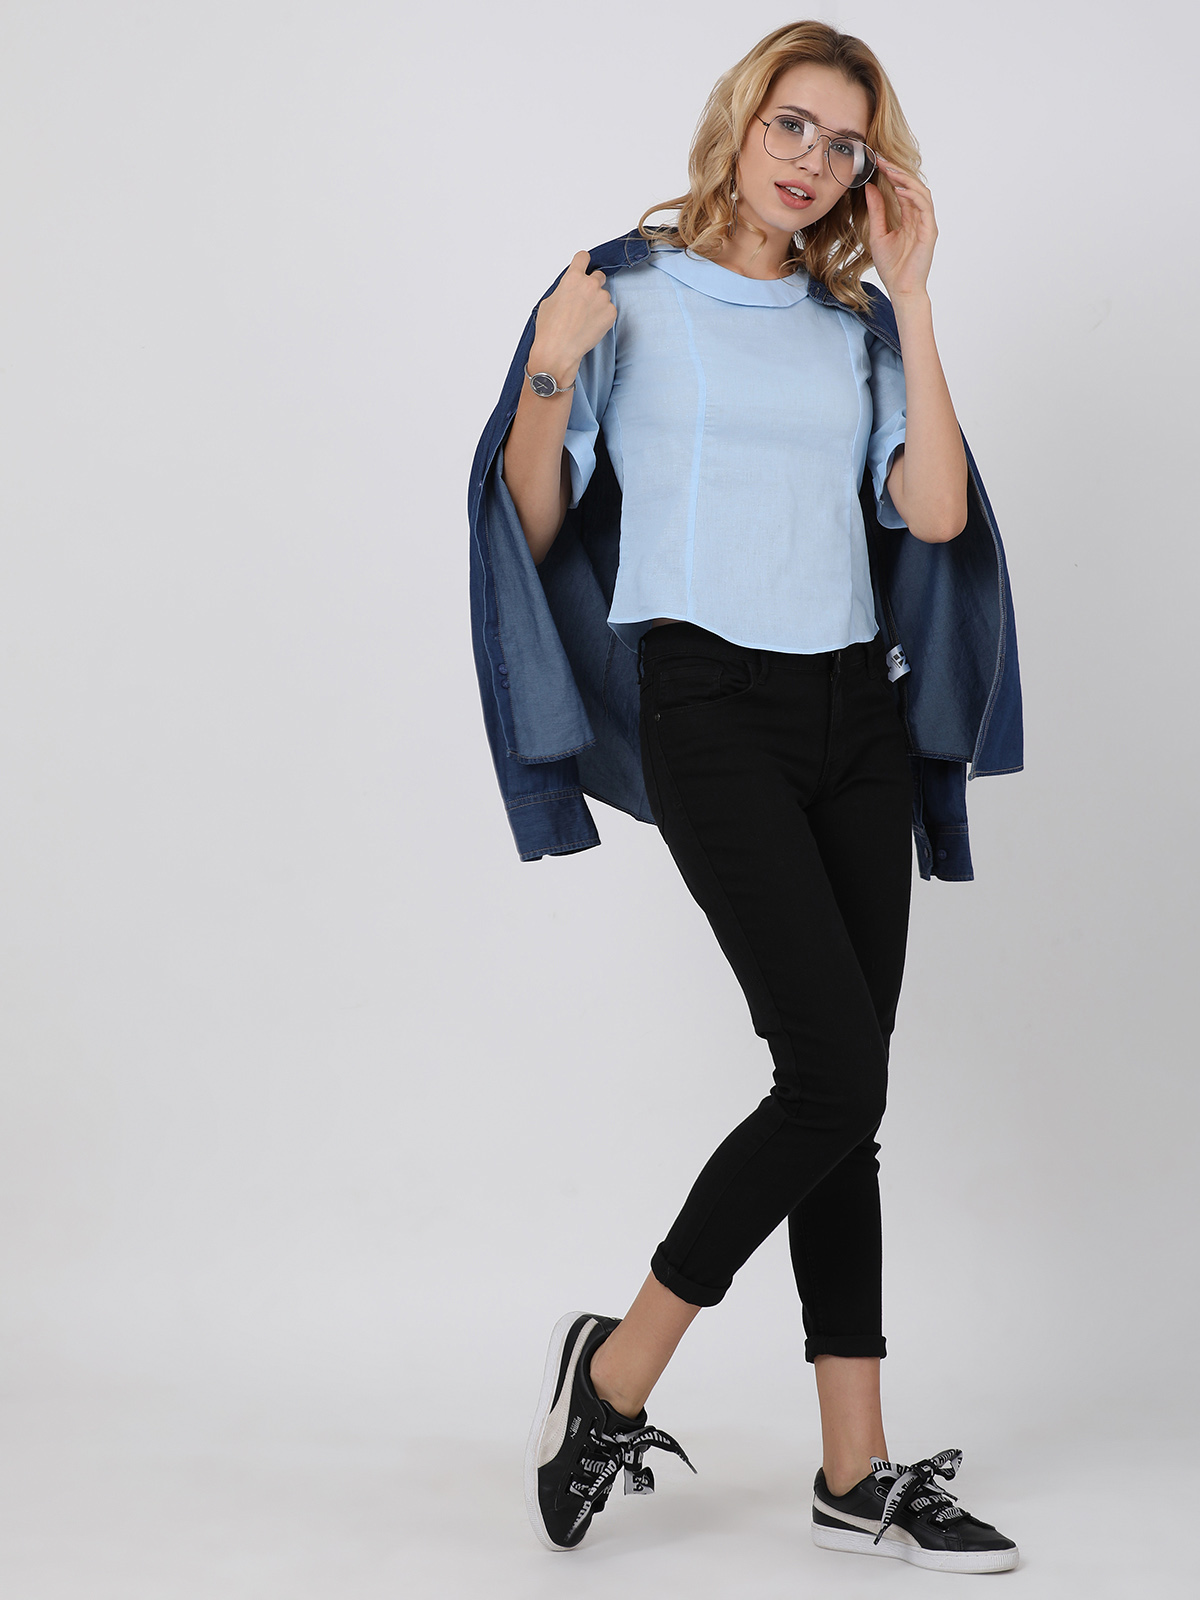 Solid Blue Mid Length Round Neck Top